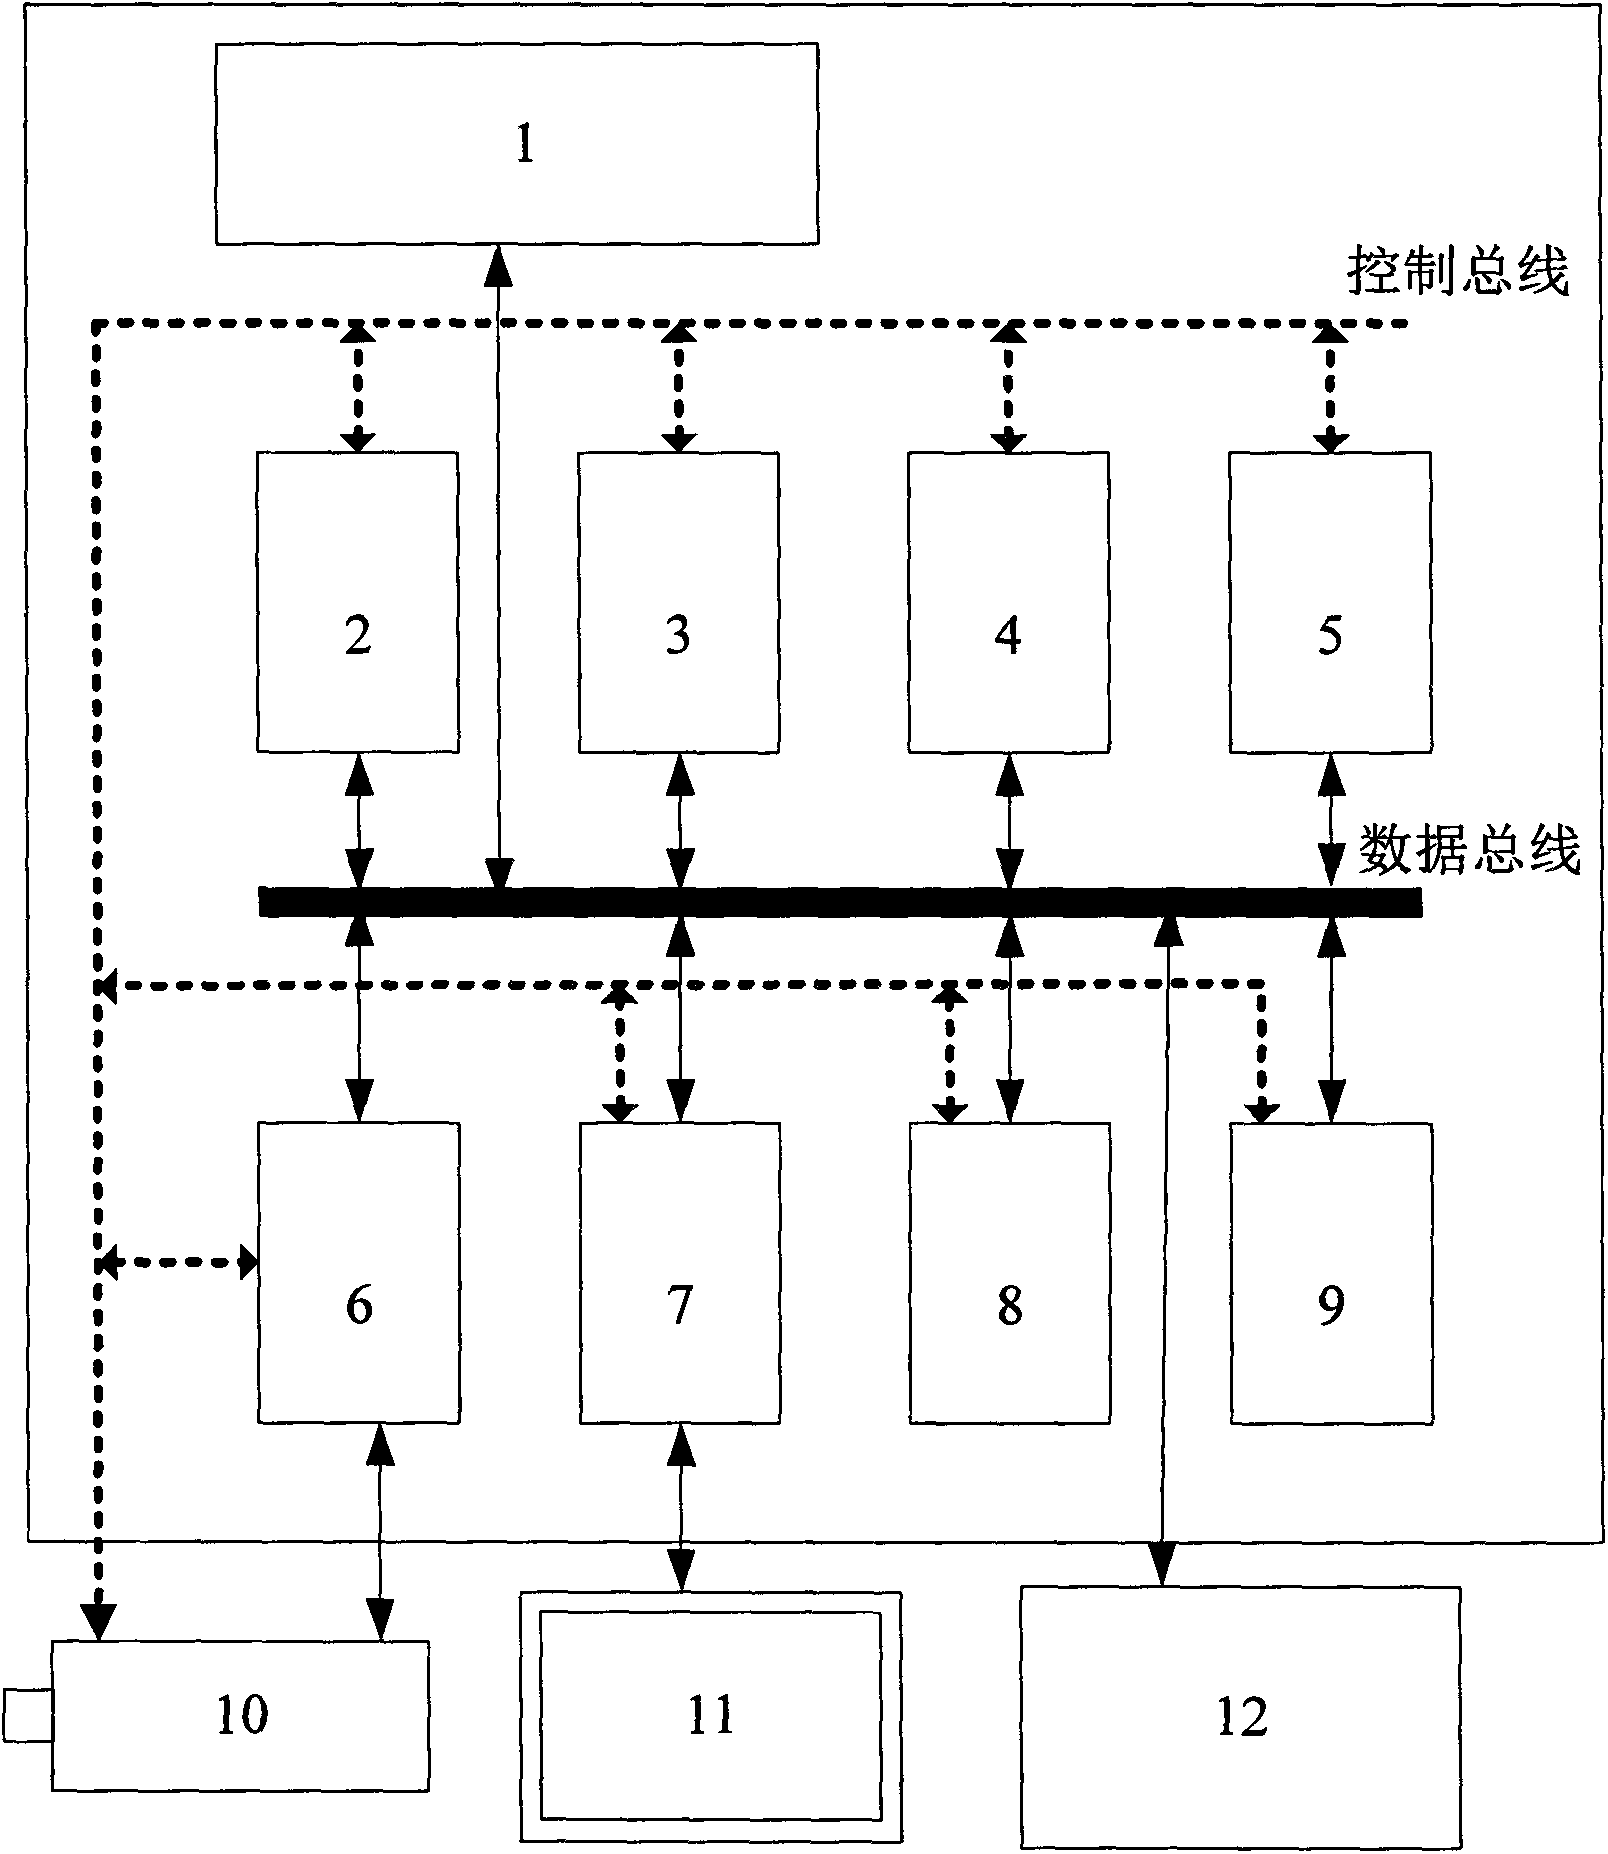 Attendance recording system having emotion identification function, and method thereof